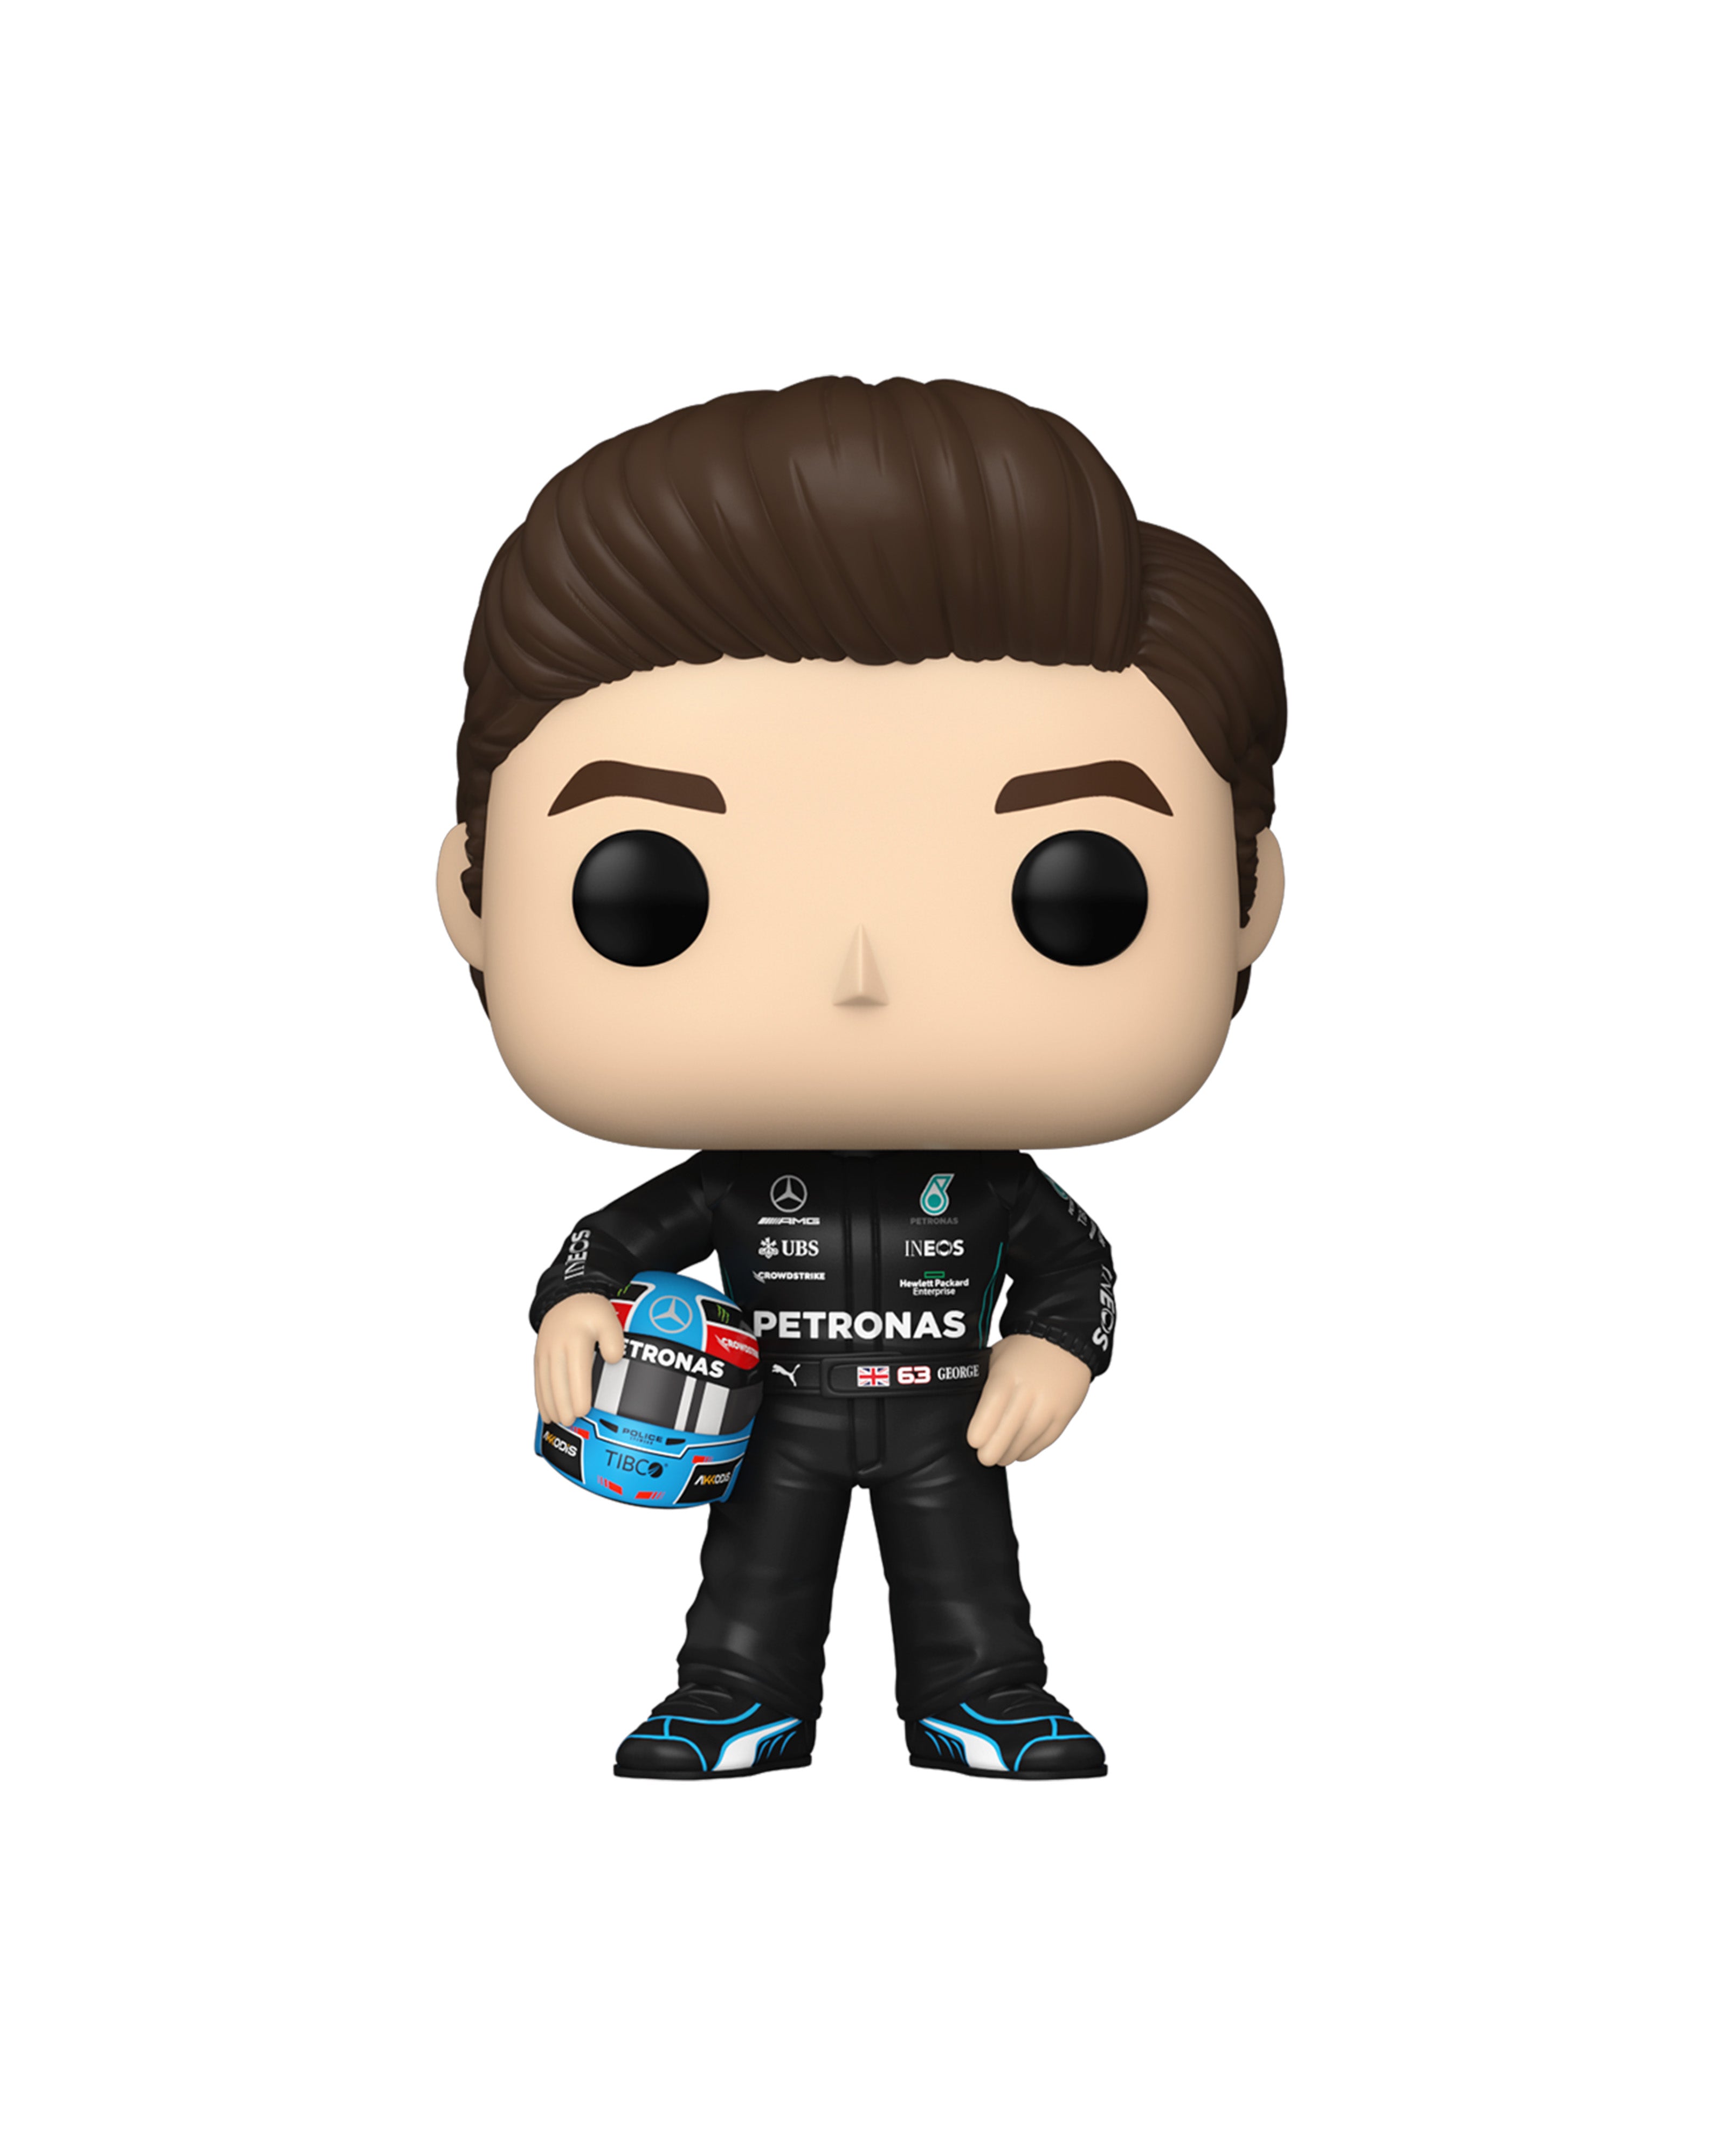 Funko POP News ! on X: First look at the new NASCAR / F1 Funko